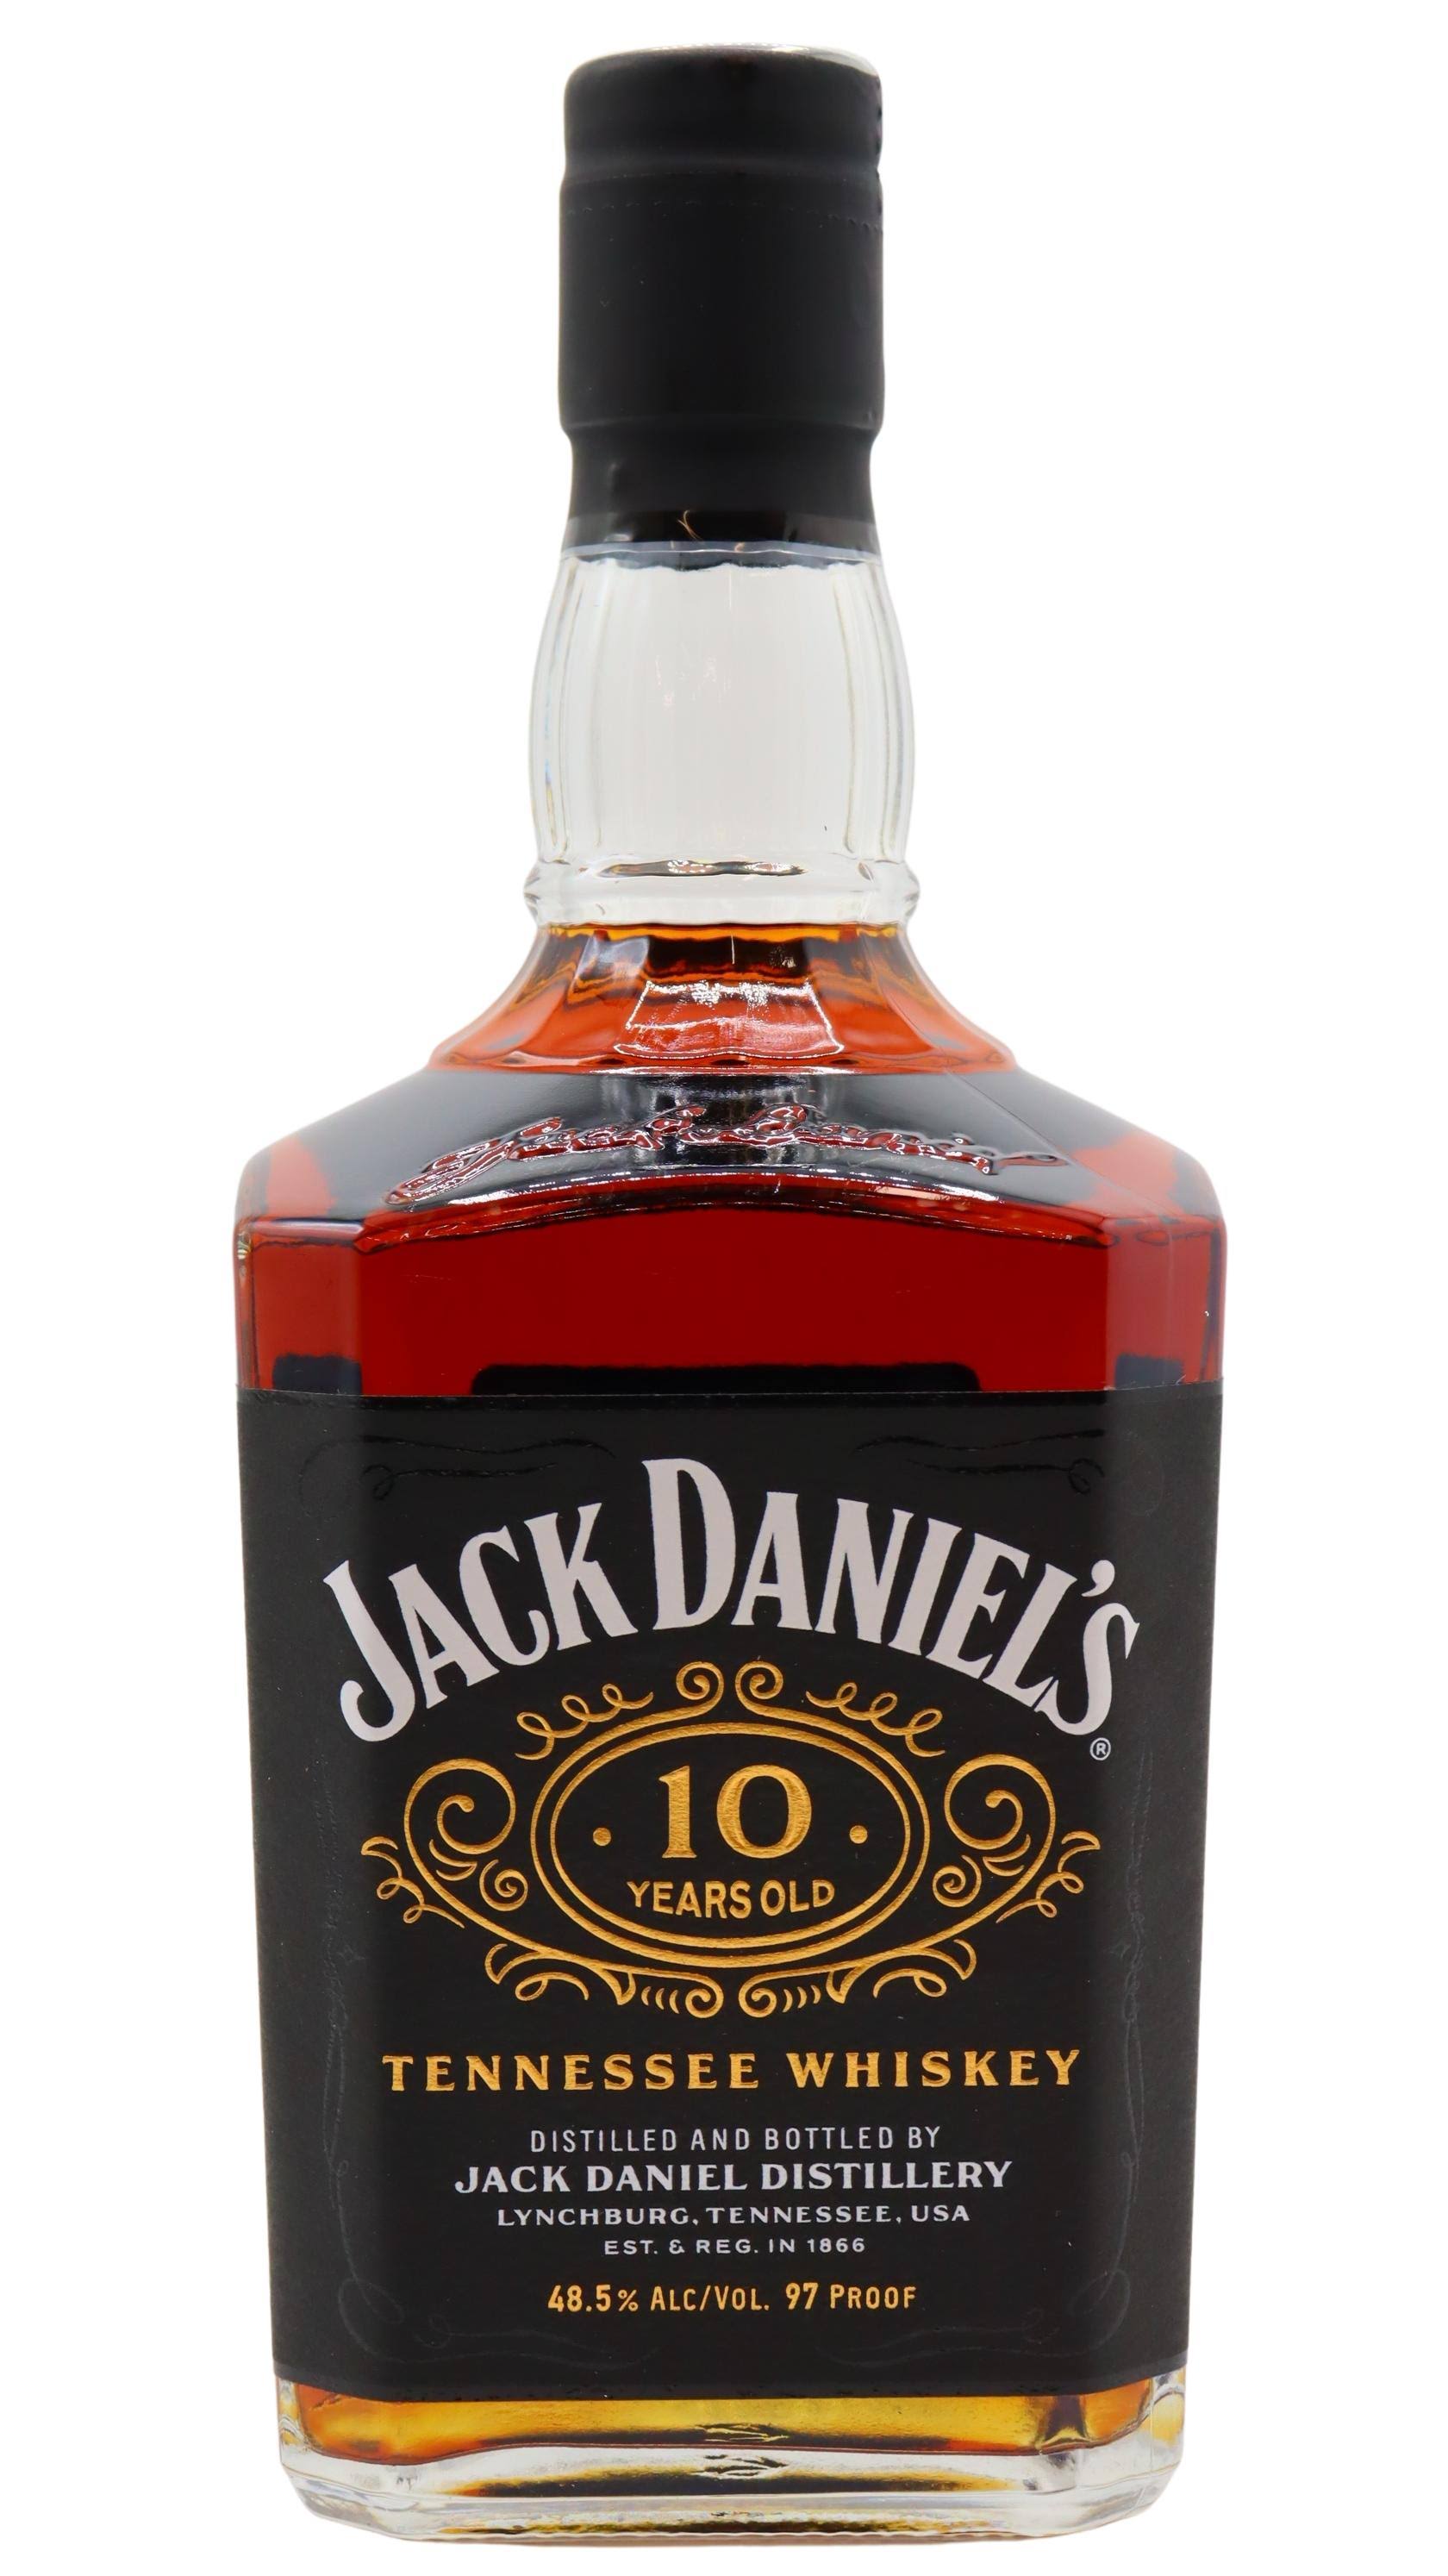 Jack Daniel's 10 Year Old Tennessee Whiskey 750ml Bottle